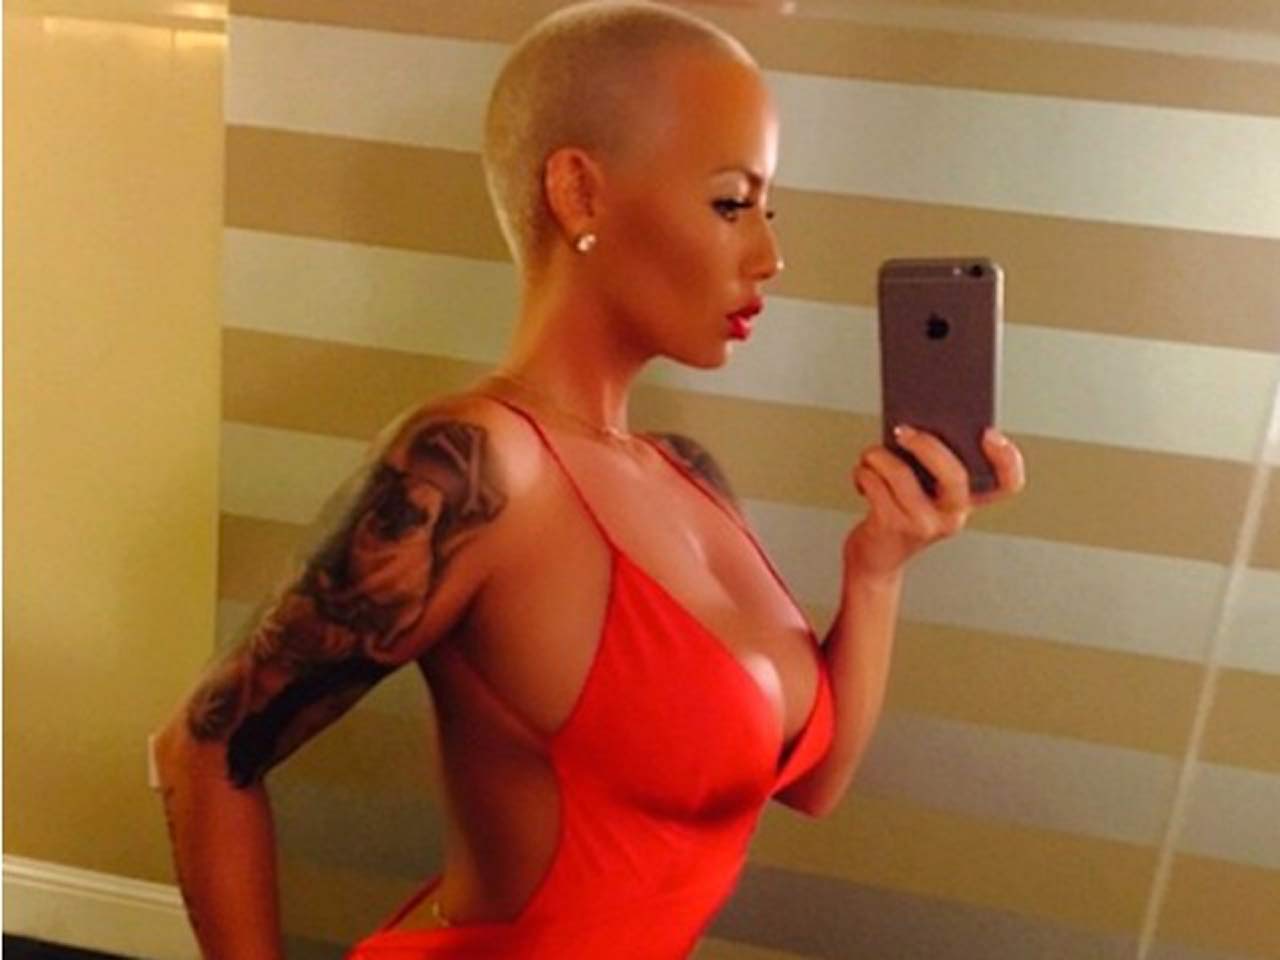 Amber rose onlyfans account